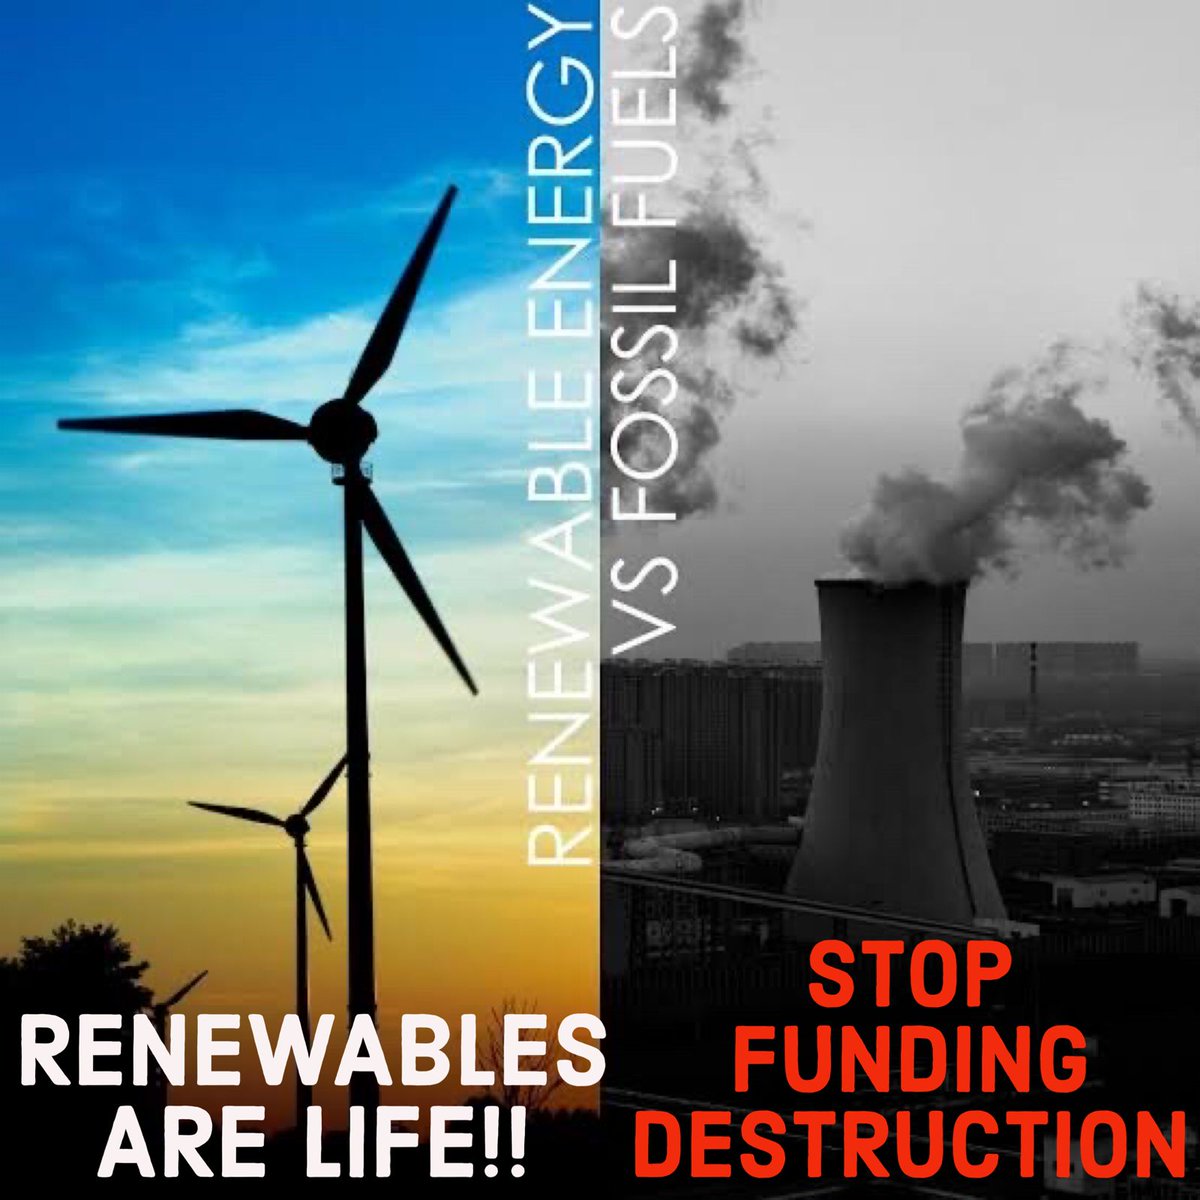 We have no time to waste on our world. We must move away from fossil fuels and toward a future that is more sustainable.

#FossilBanksNoThanks, #YesSolar #CleanEnergyCleanFuture  #RiseUpMovement
@Barclays @StanChart 
@350 @MarshGlobal, @StandardBankZA 
@Riseupmovt